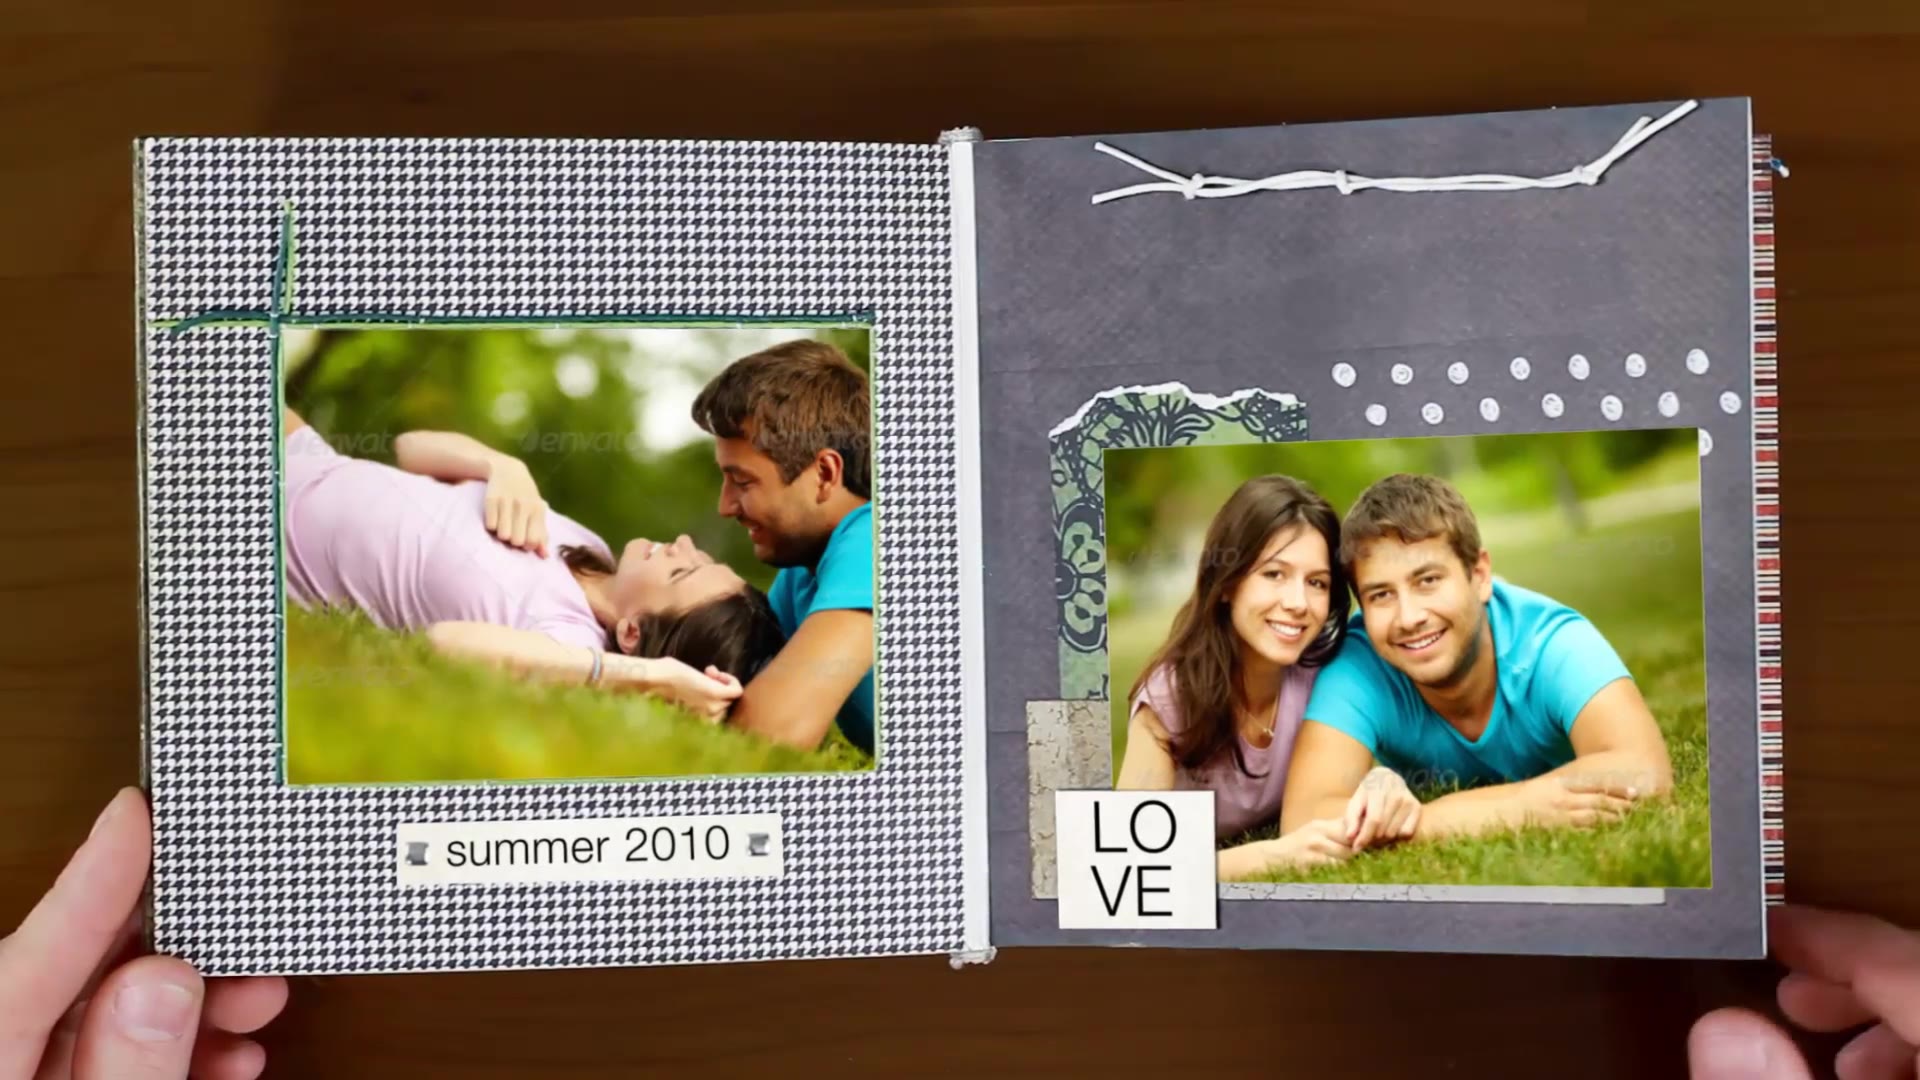 Moments Of Love - Download Videohive 6489872